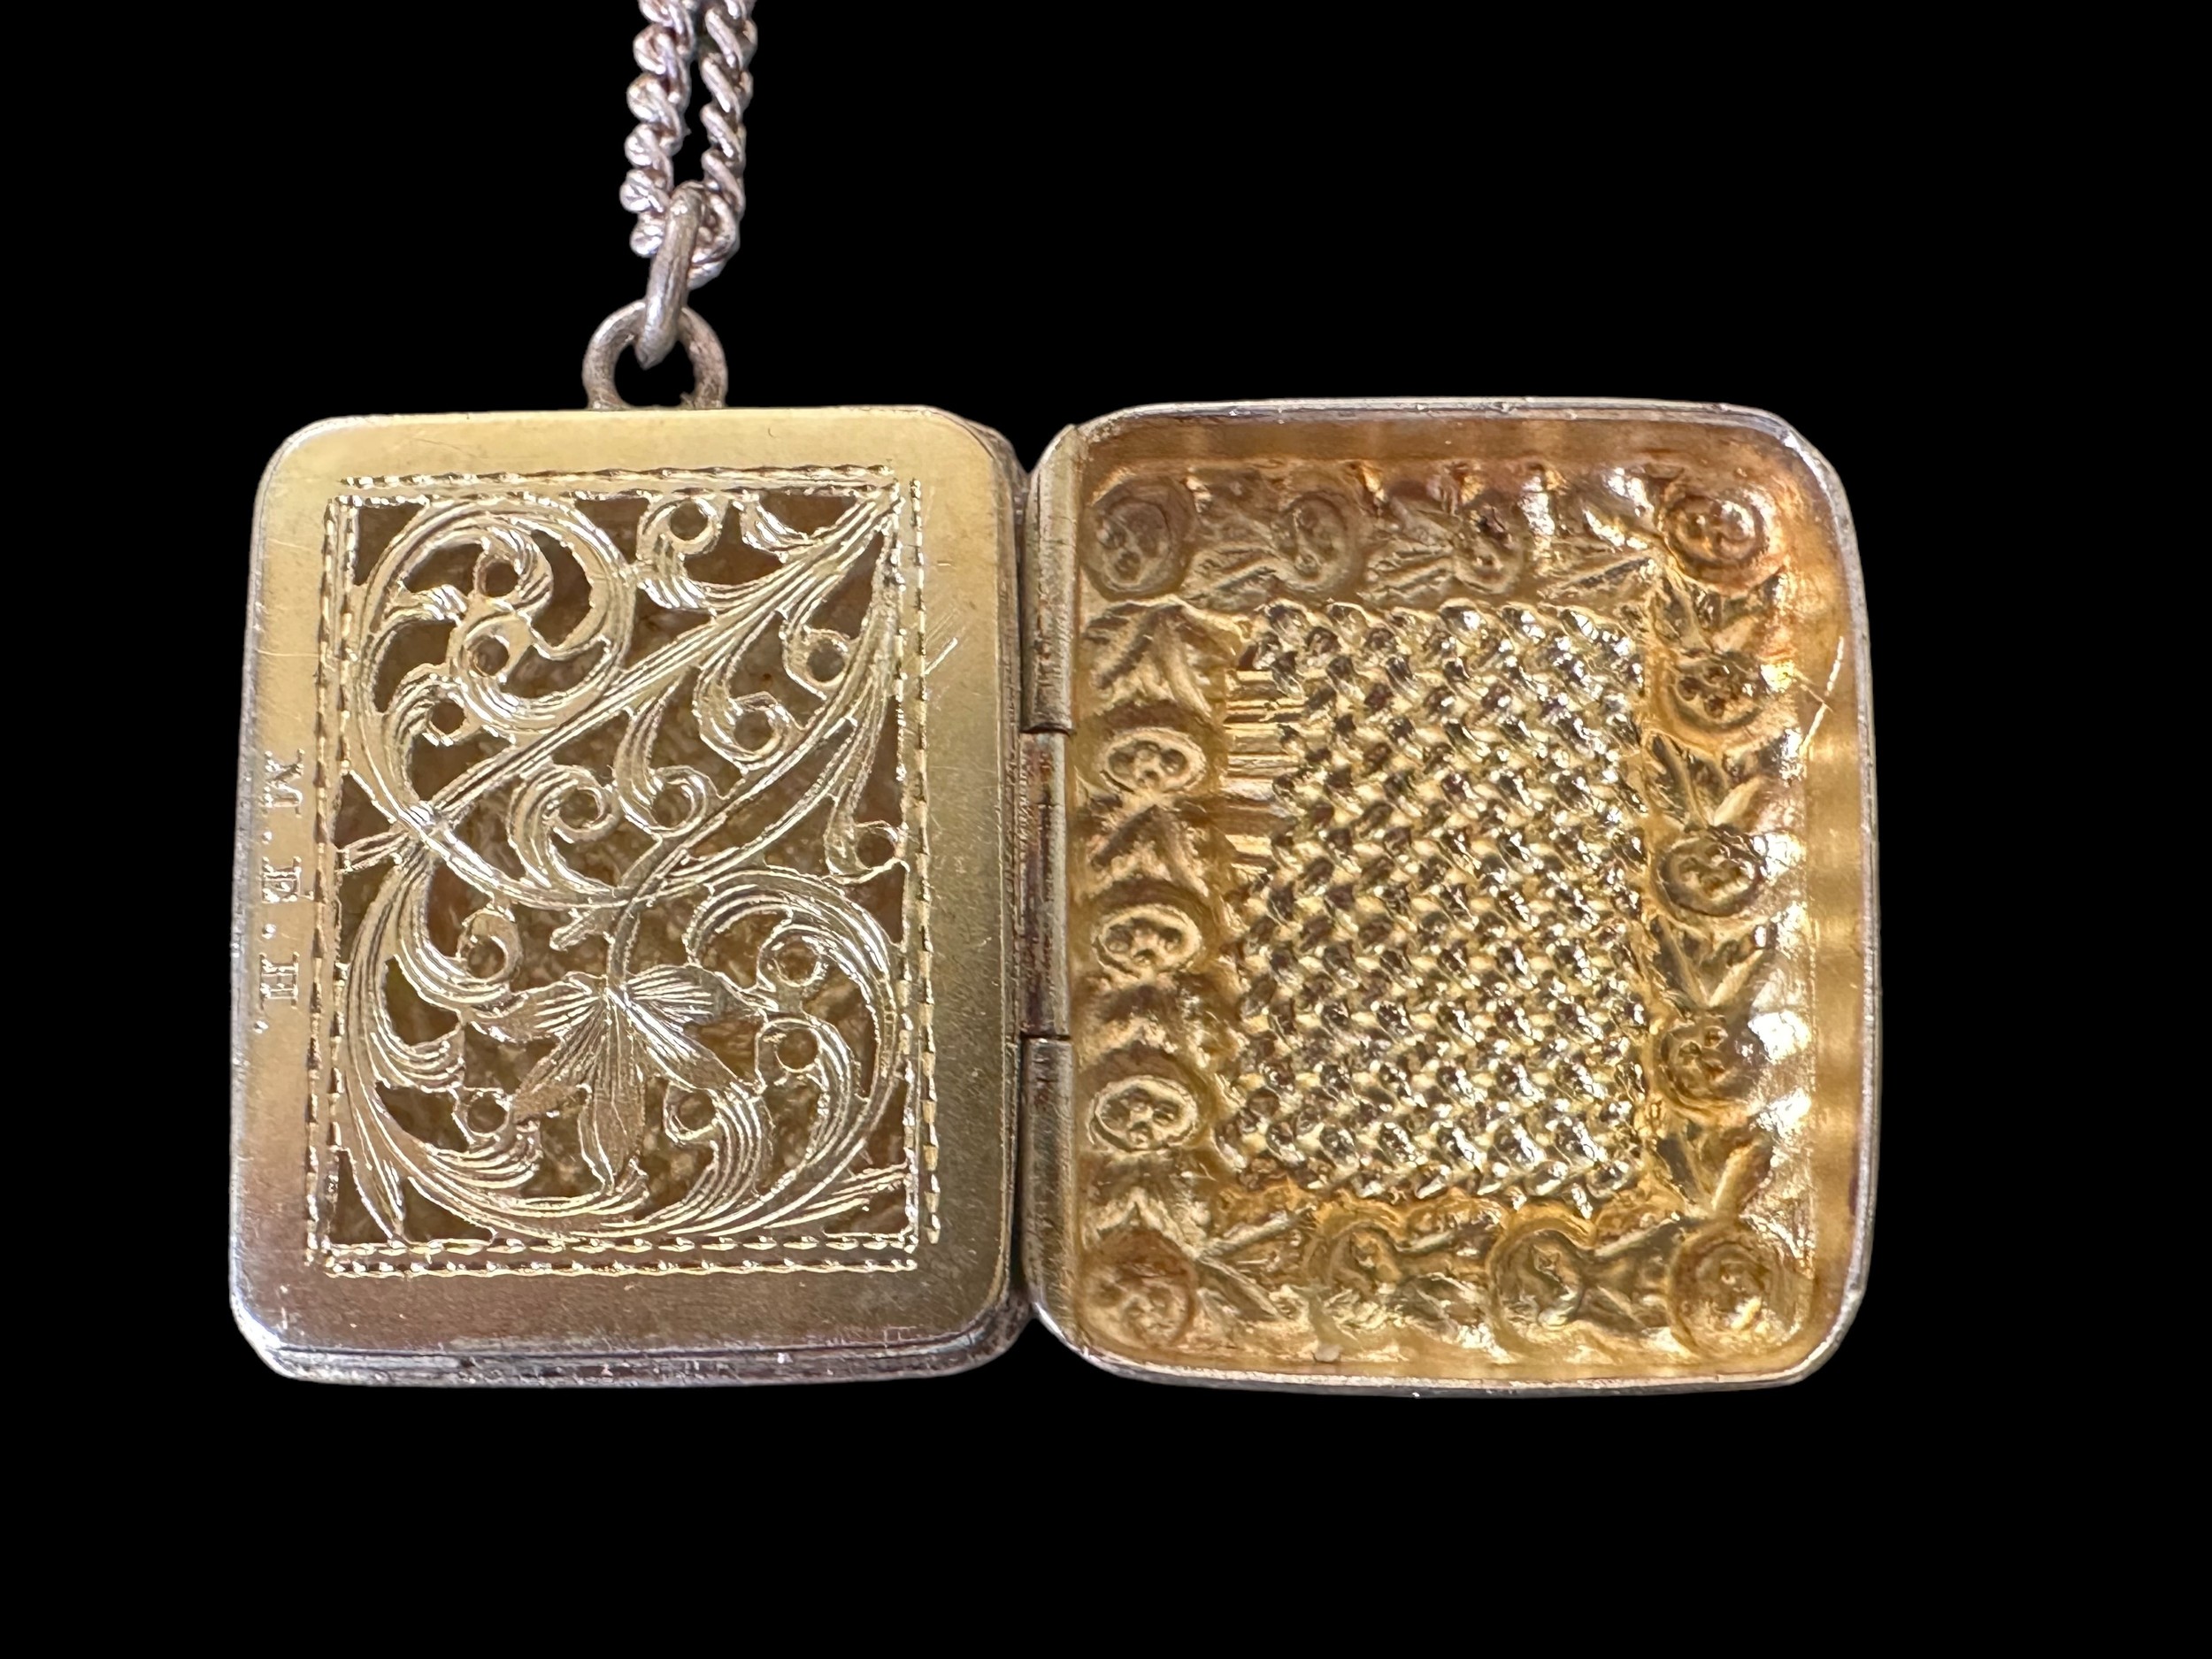 A silver vinaigrette pendant with gilt interior. Marked M.E.H. in the interior. Hallmarks rubbed and - Image 2 of 2